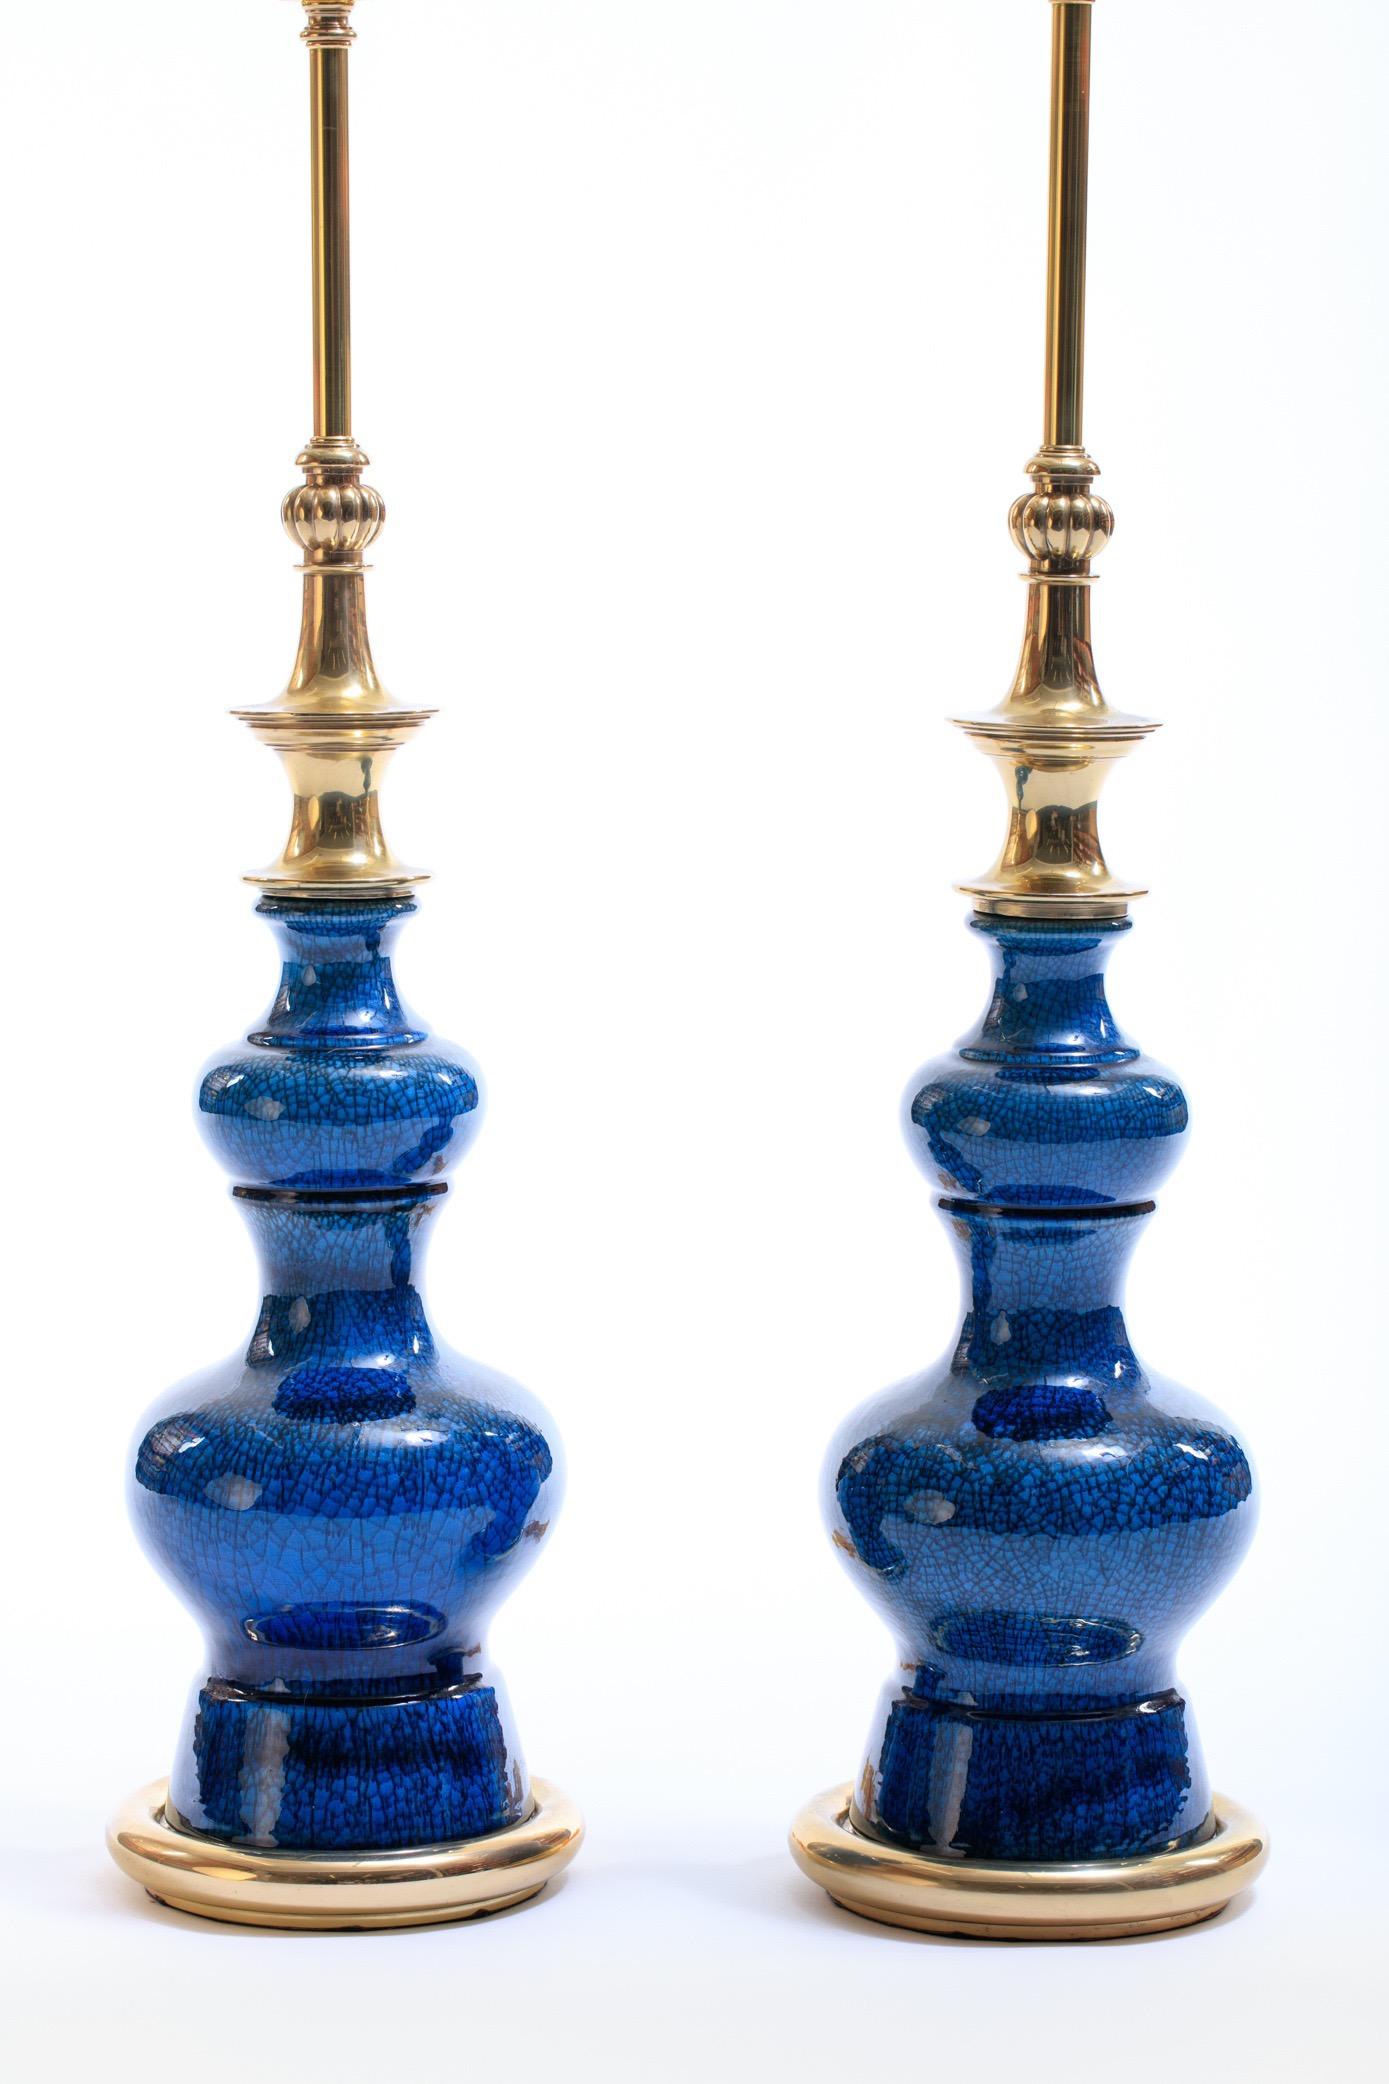 1960s lamp with ceramic gourd forms and brass fittings. Deep cobalt blue crackle glaze. Note white reflections of lights in photos are not loses to the finish but instead the reflection of studio lights in the images. The lamps would work in a